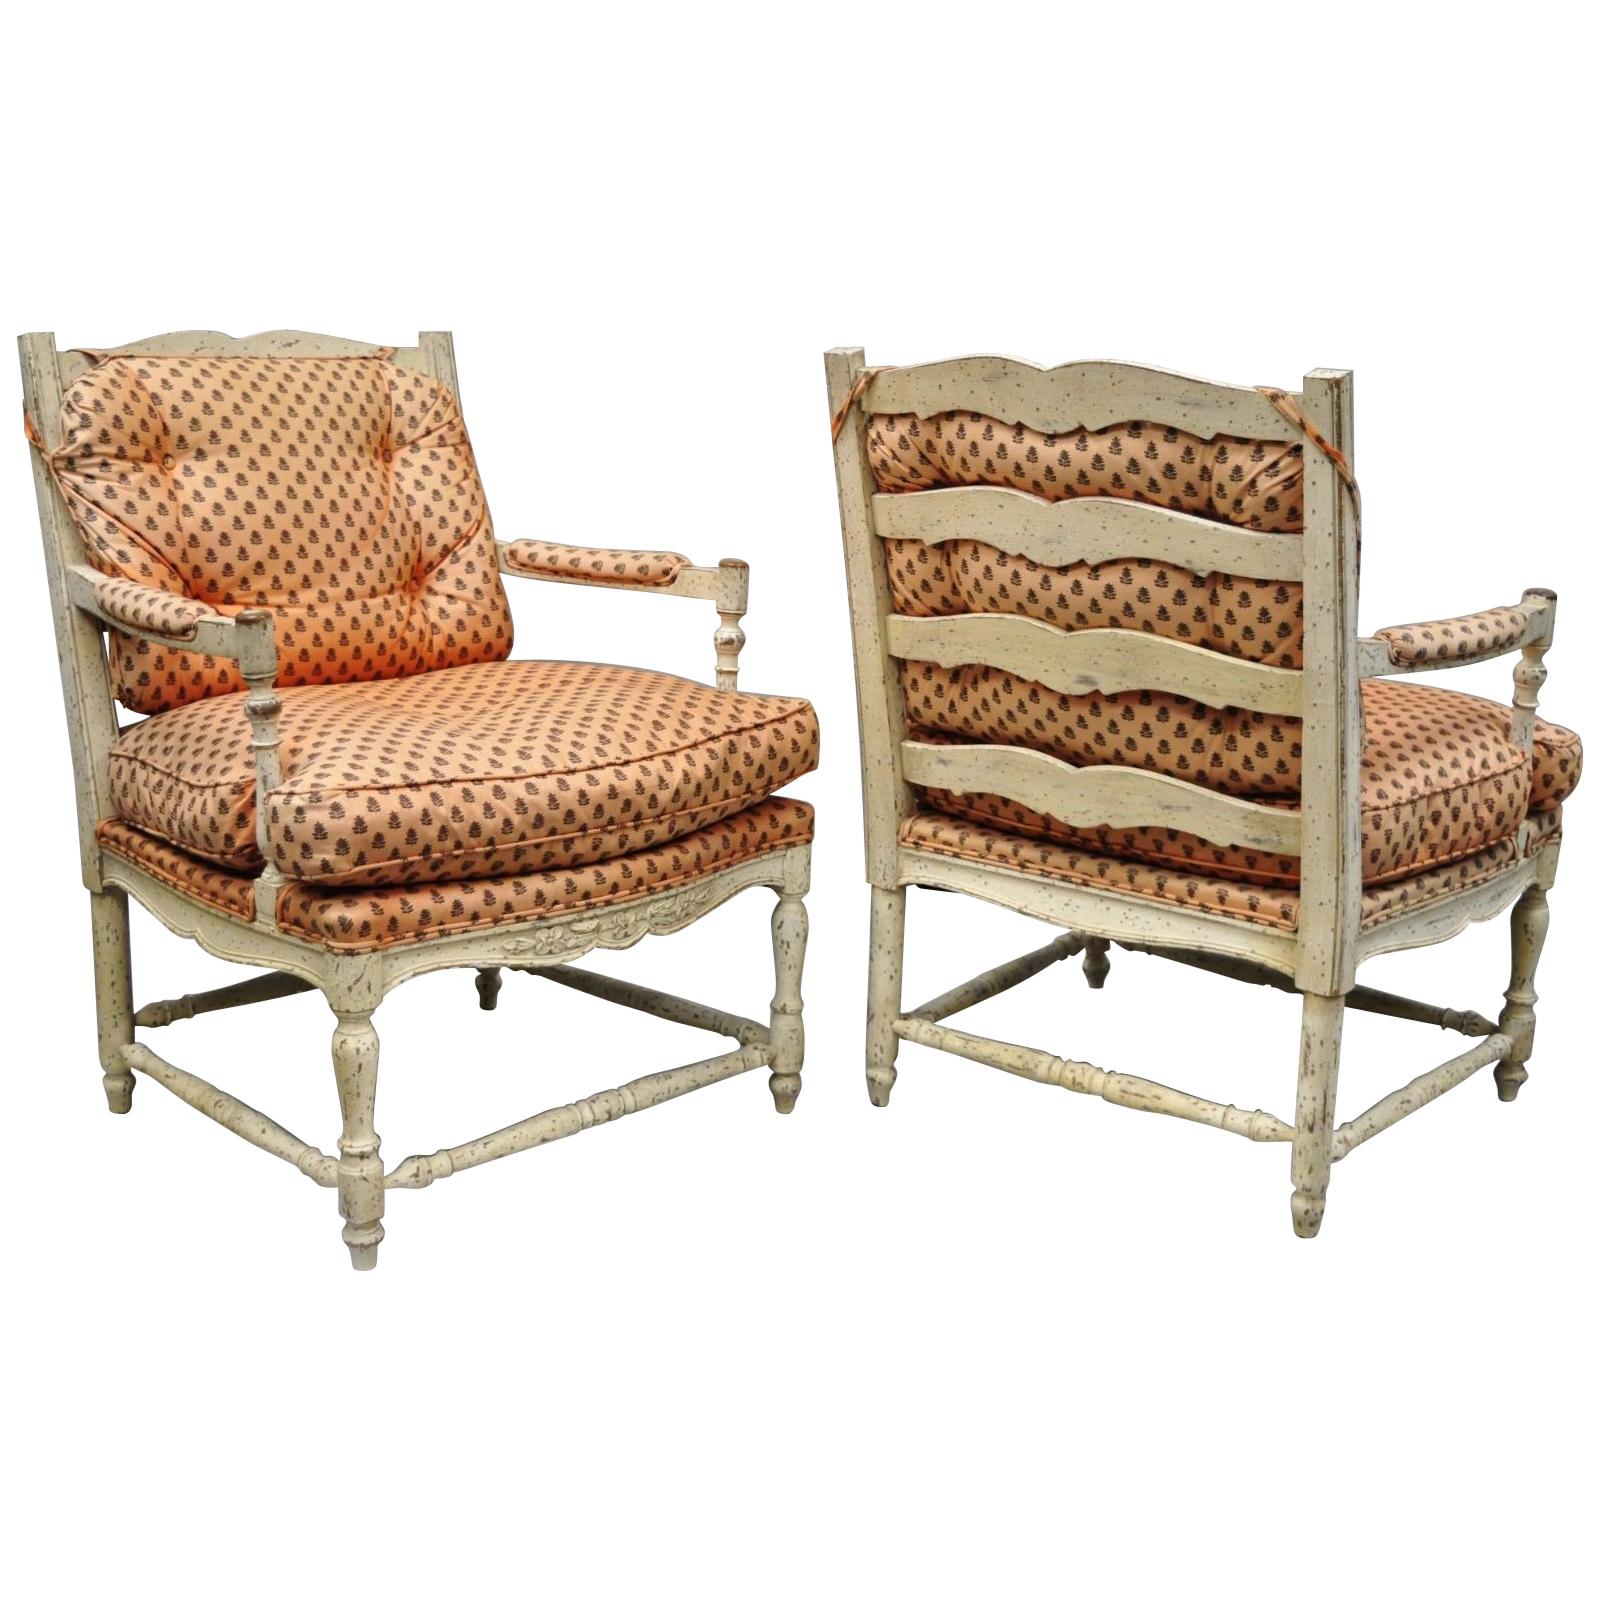 Pair of French Country Cream Distress Painted Lounge Chair Ladder Back Armchairs